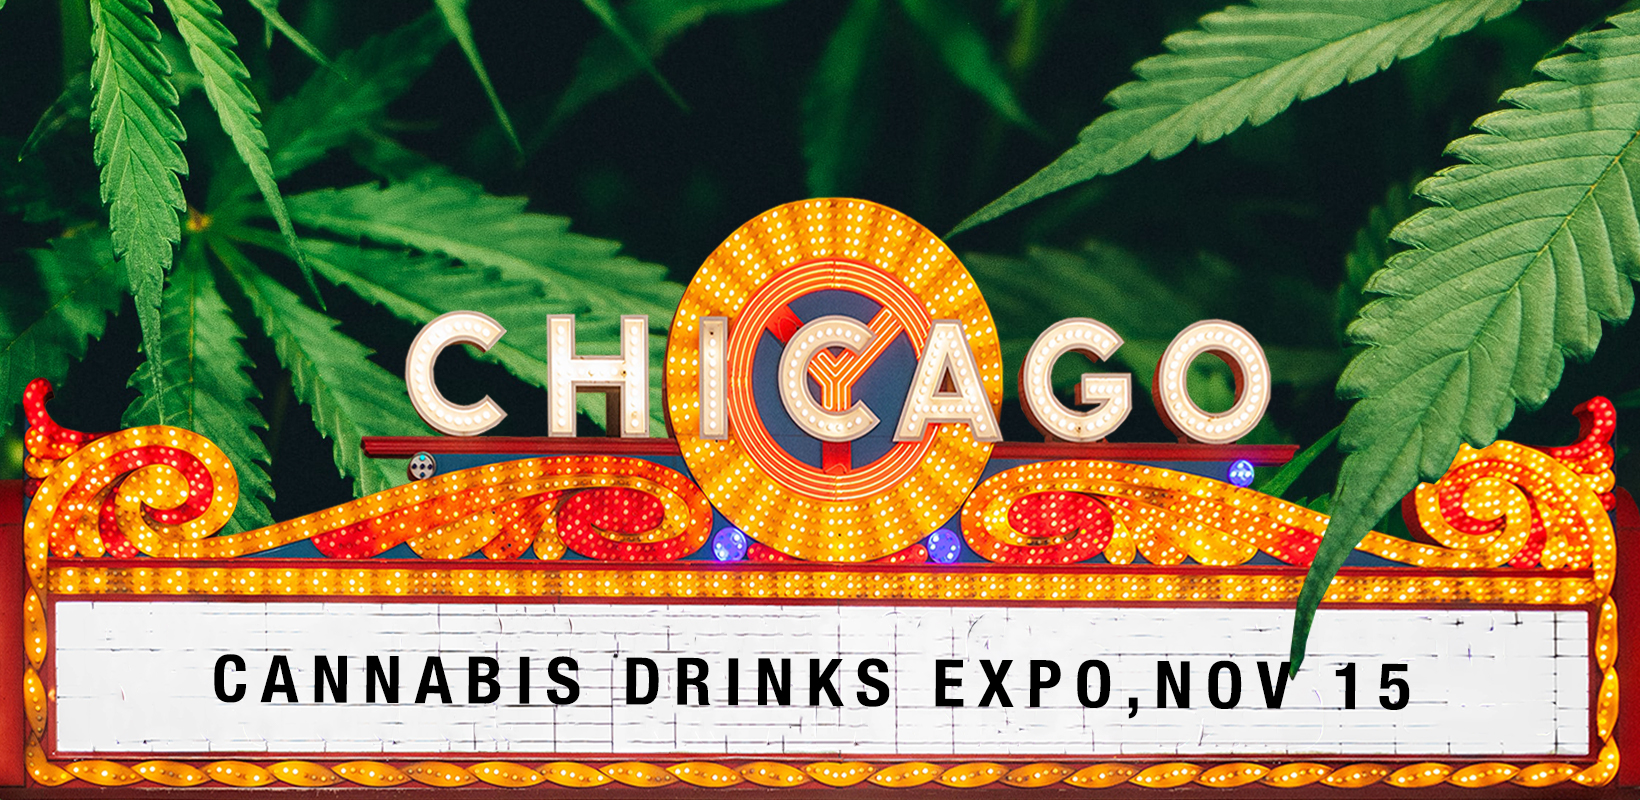 Photo for: Why Attend the Chicago Cannabis Drinks Expo 2021?